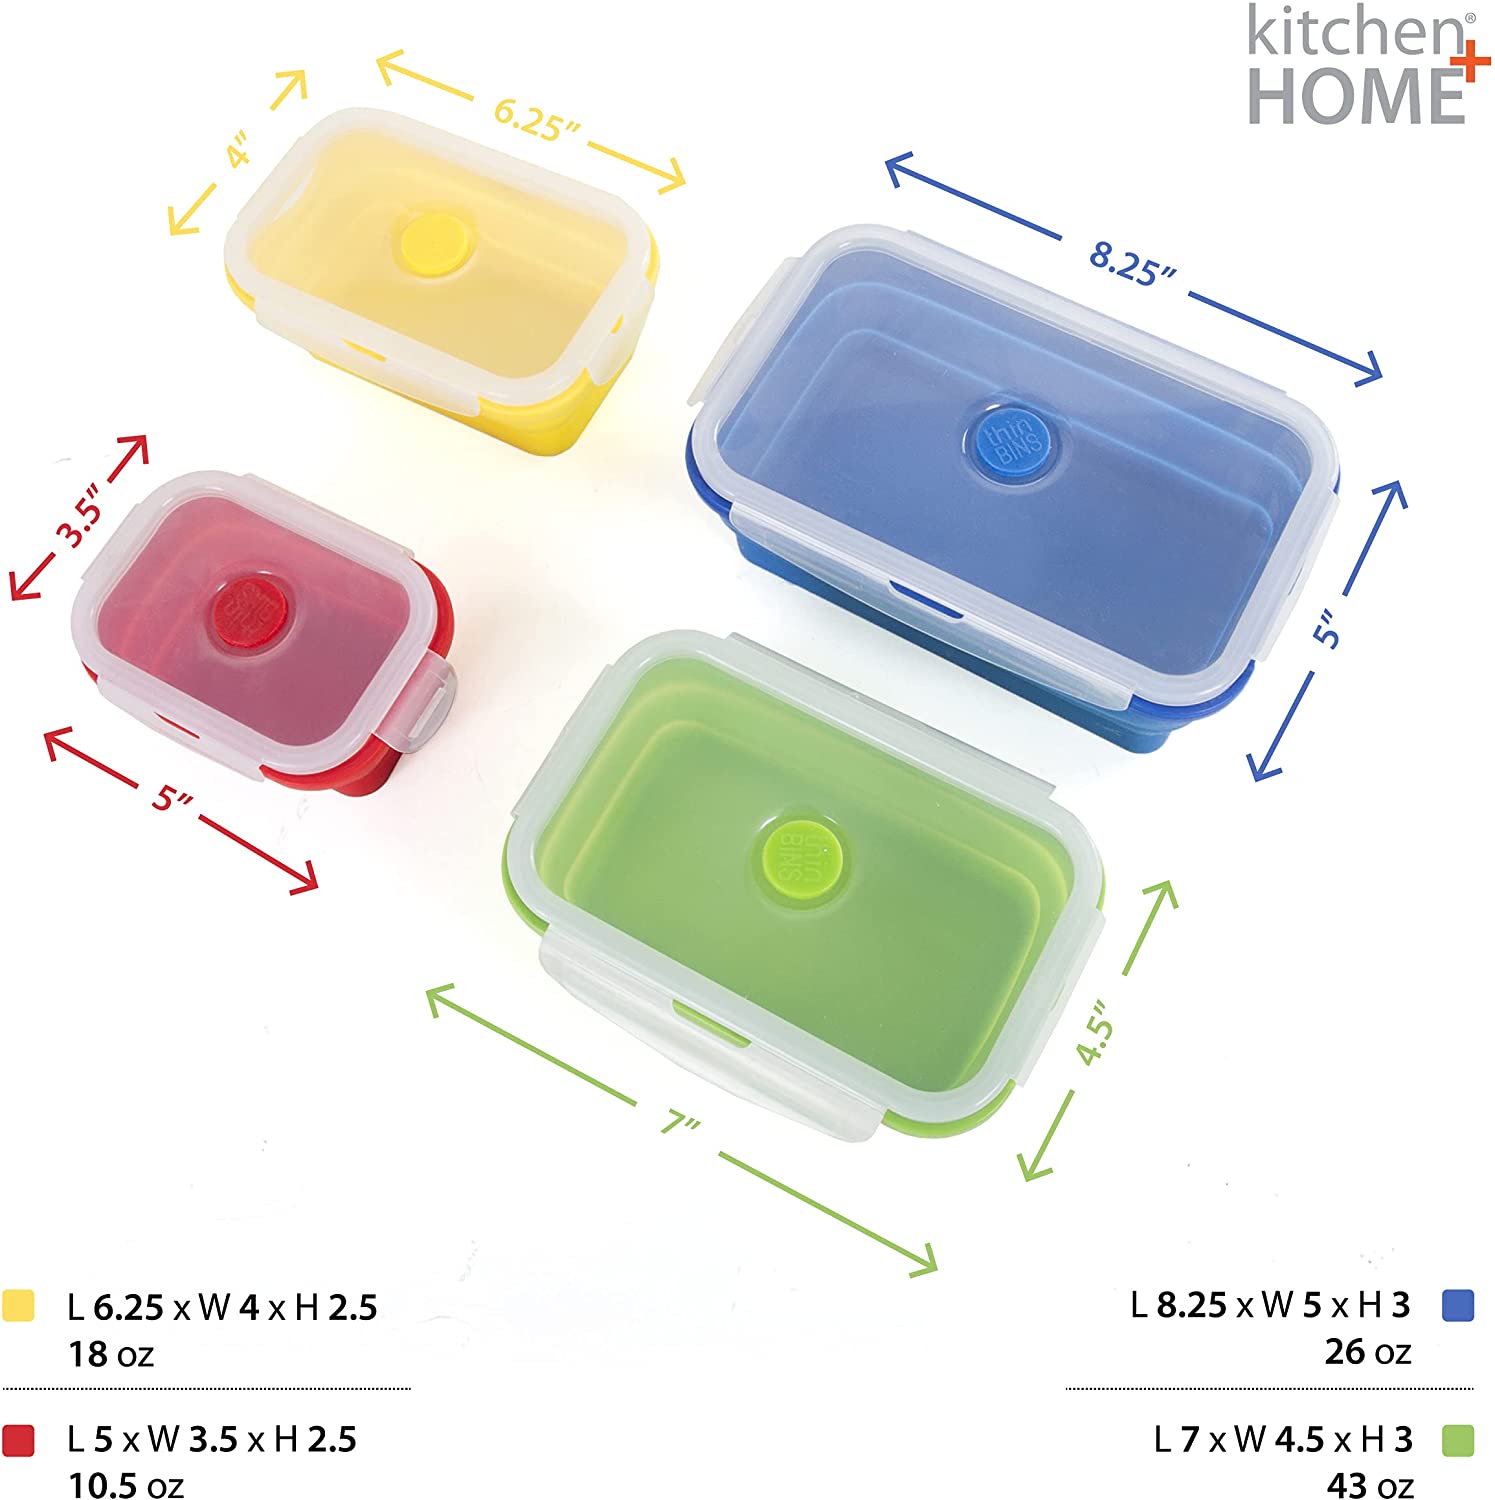 Thin Bins Collapsible Containers Set of 4 Rectangle Silicone Food Storage Containers BPA Free, Microwave, Dishwasher Safe - image 2 of 8